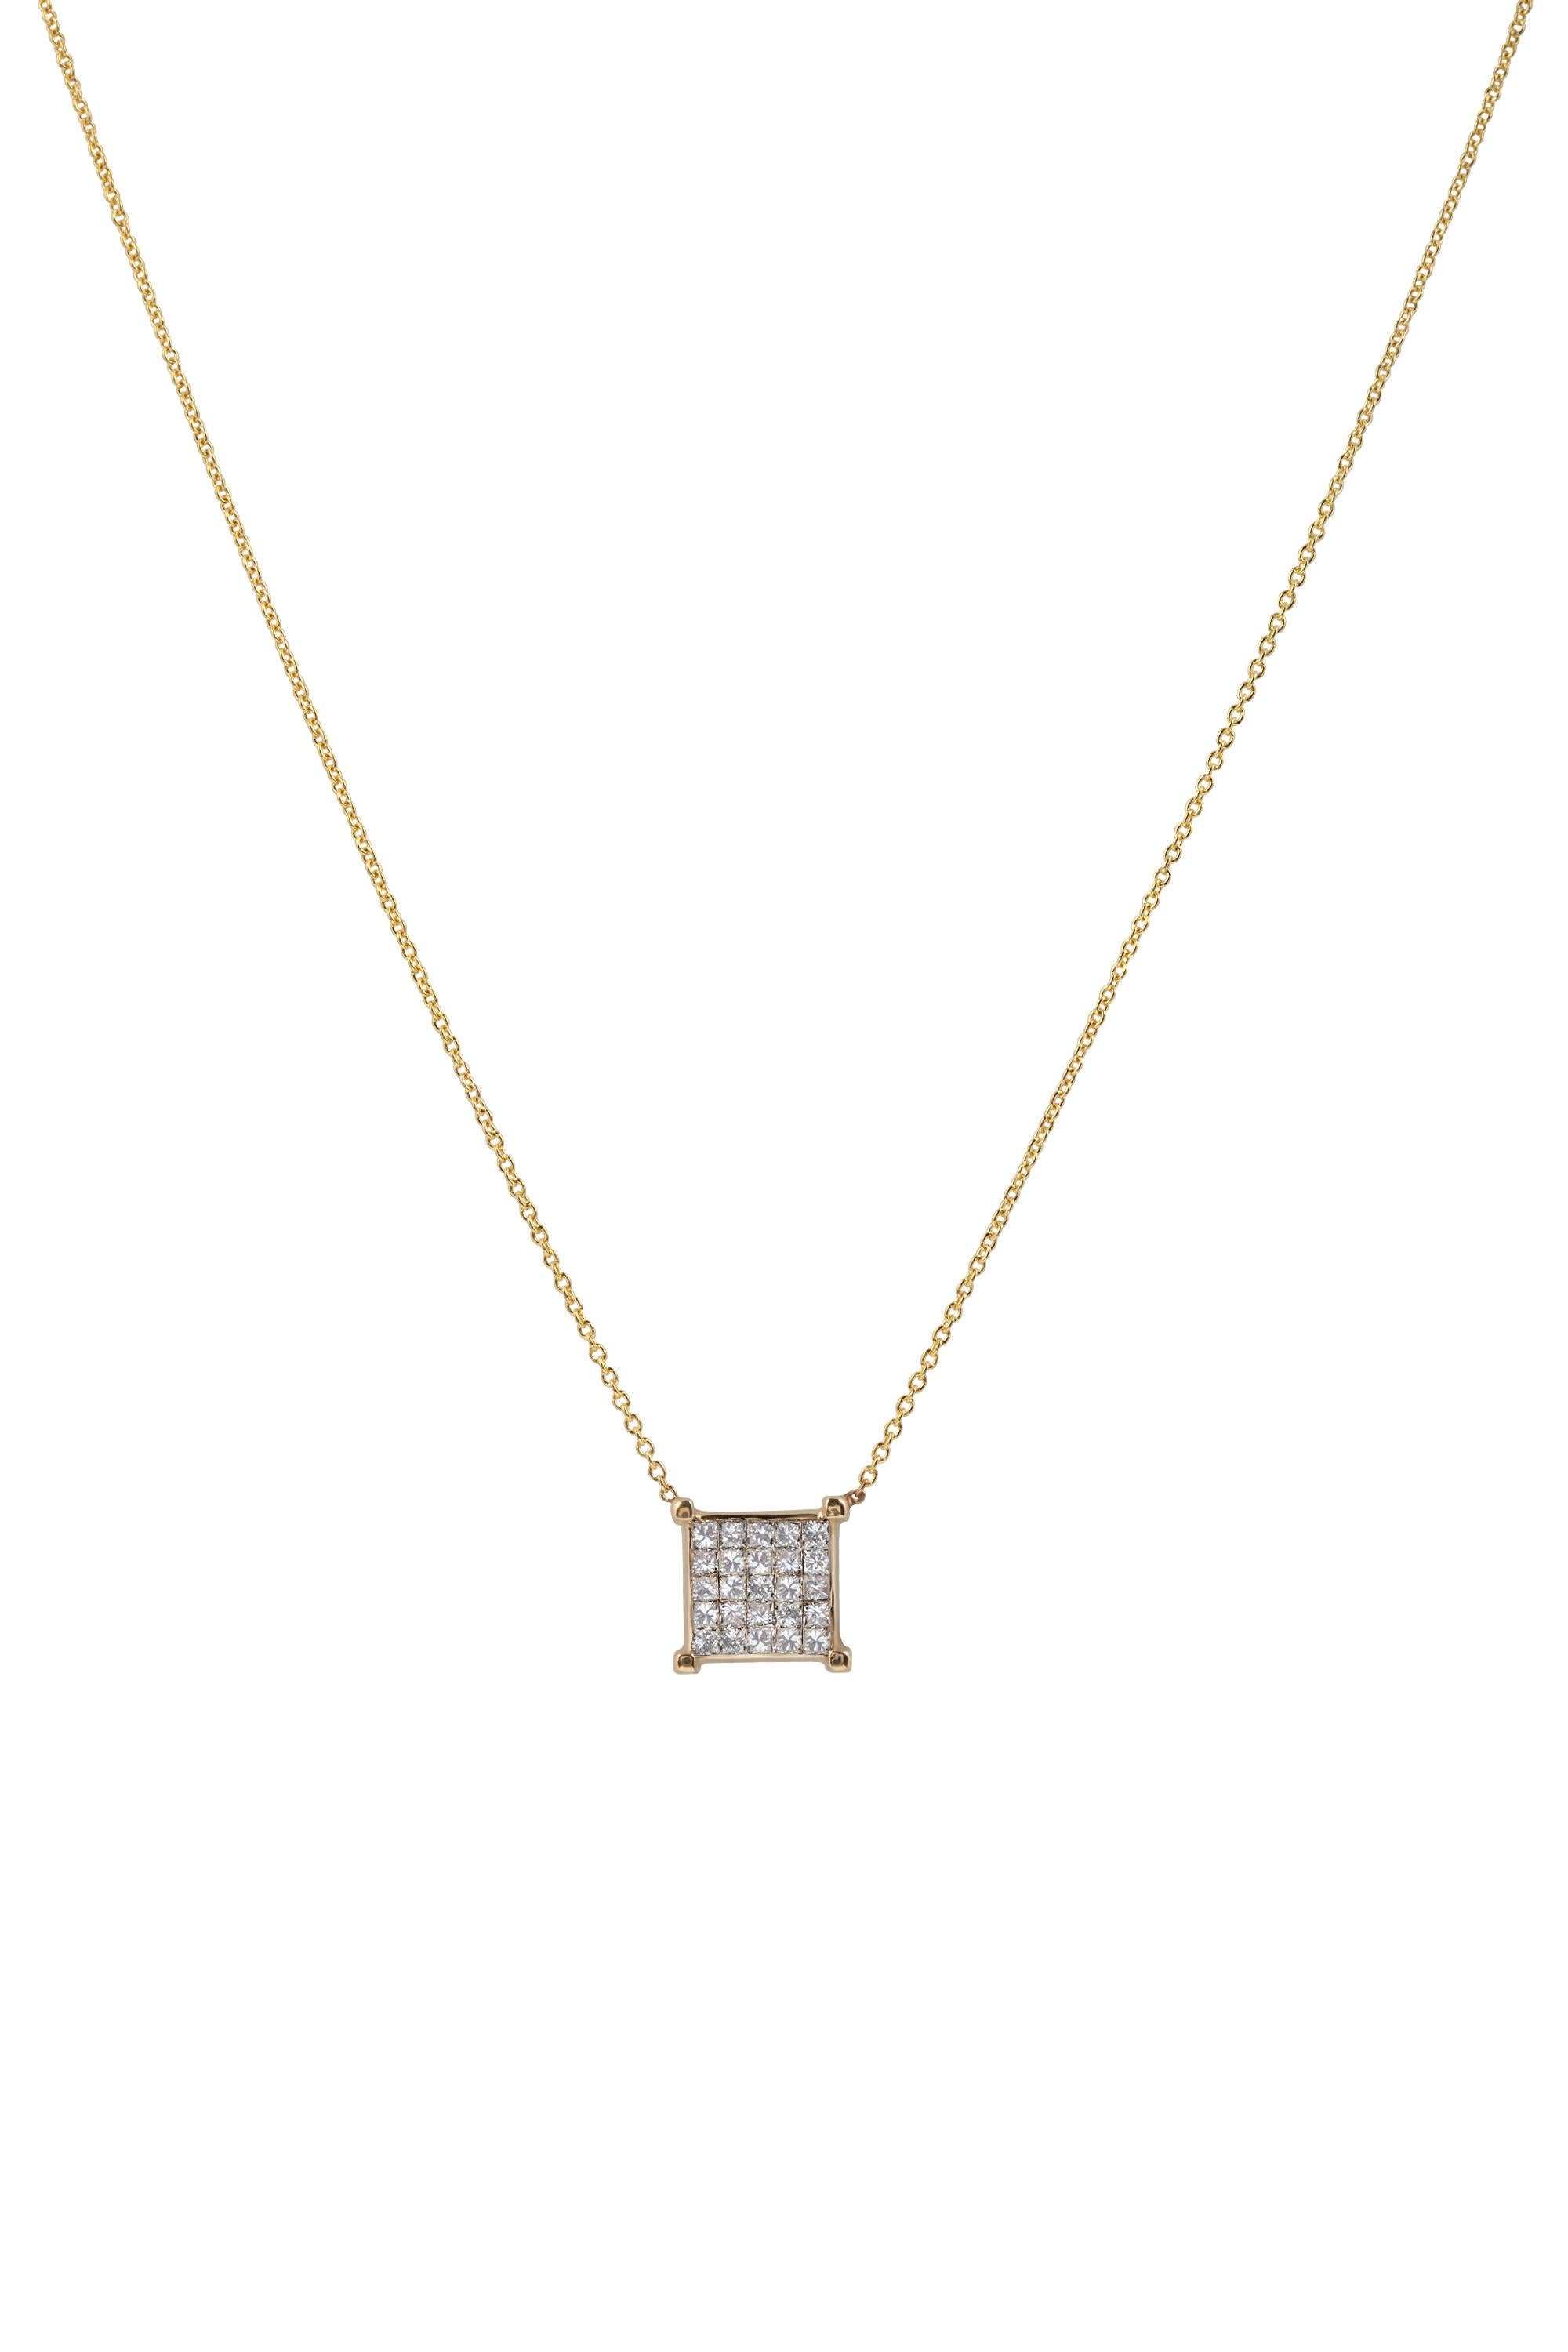 Invisible Set Princess Cut Diamond Pendant Necklace In Excellent Condition For Sale In beverly hills, CA